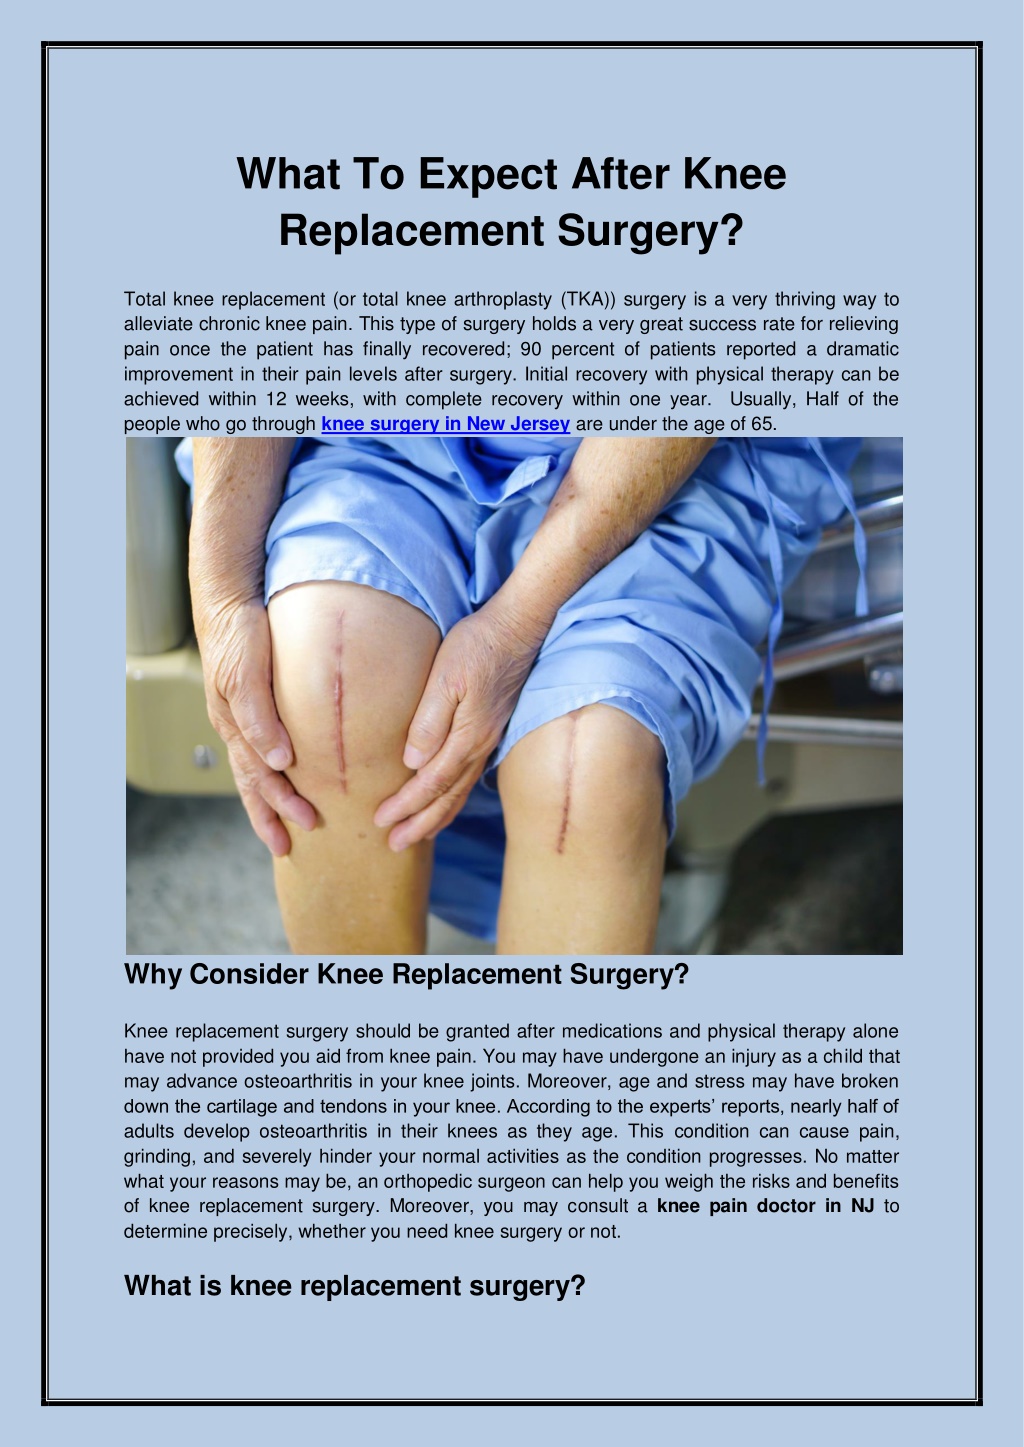 Ppt What To Expect After Knee Replacement Surgery Powerpoint Presentation Id10877071 4426